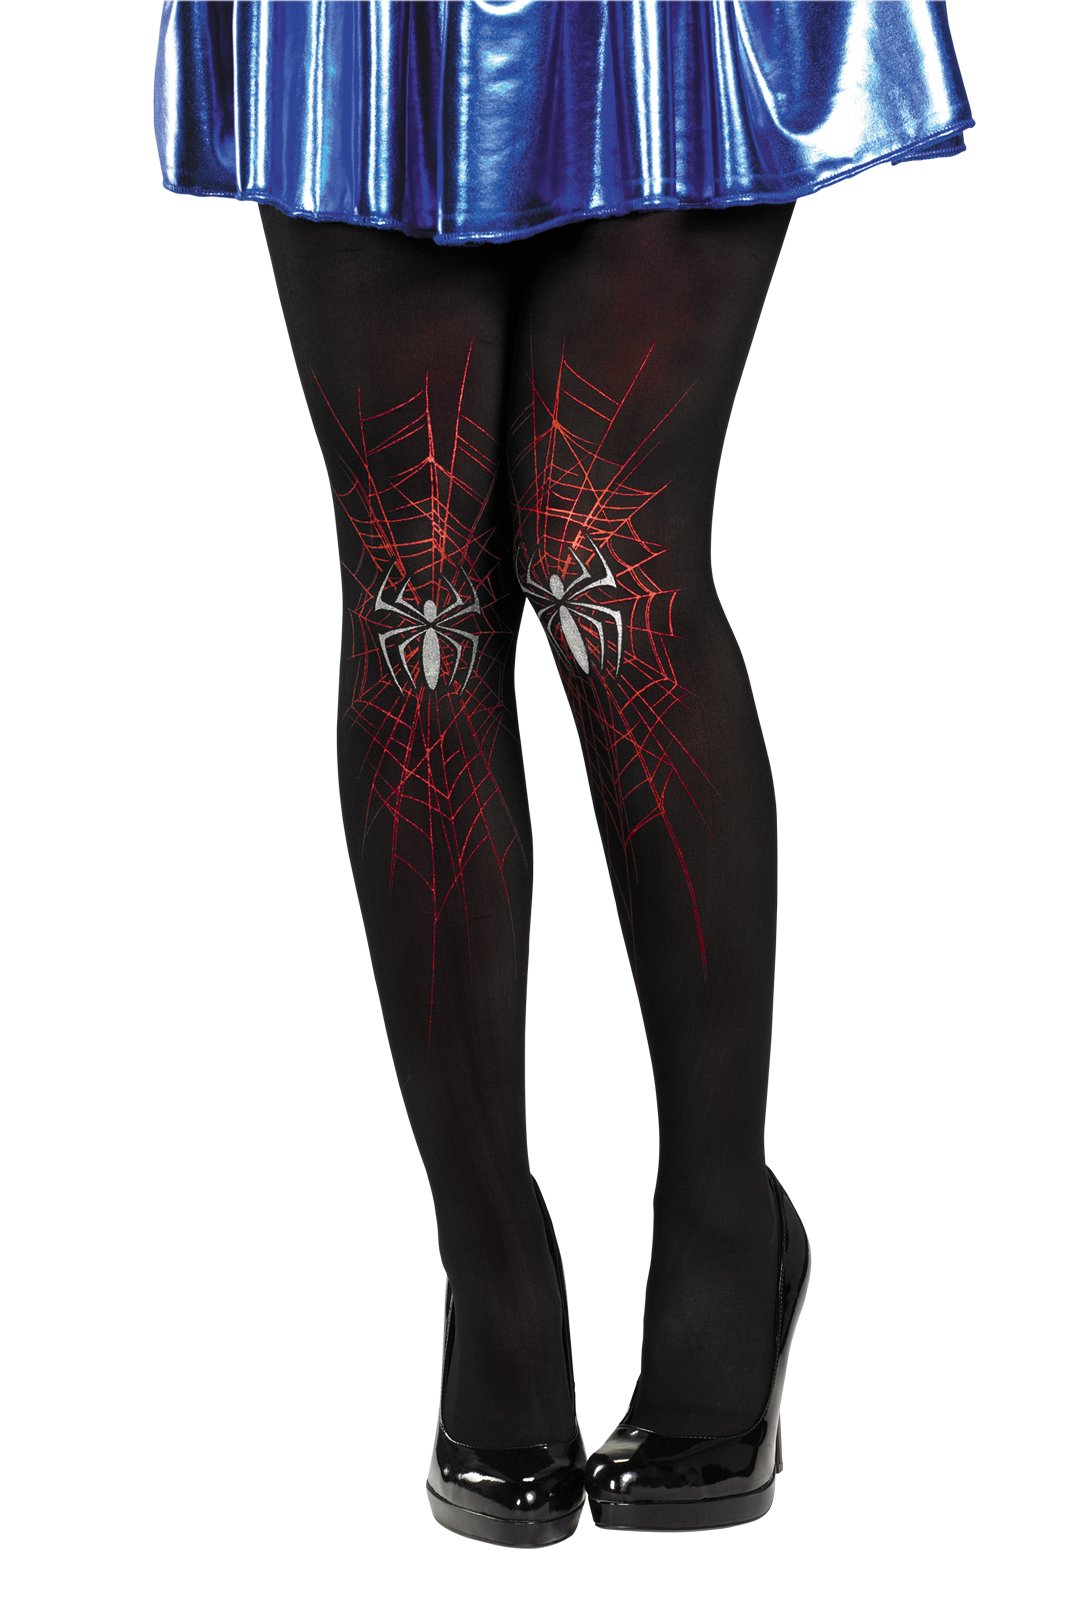 Spider - Girl Adult Pantyhose